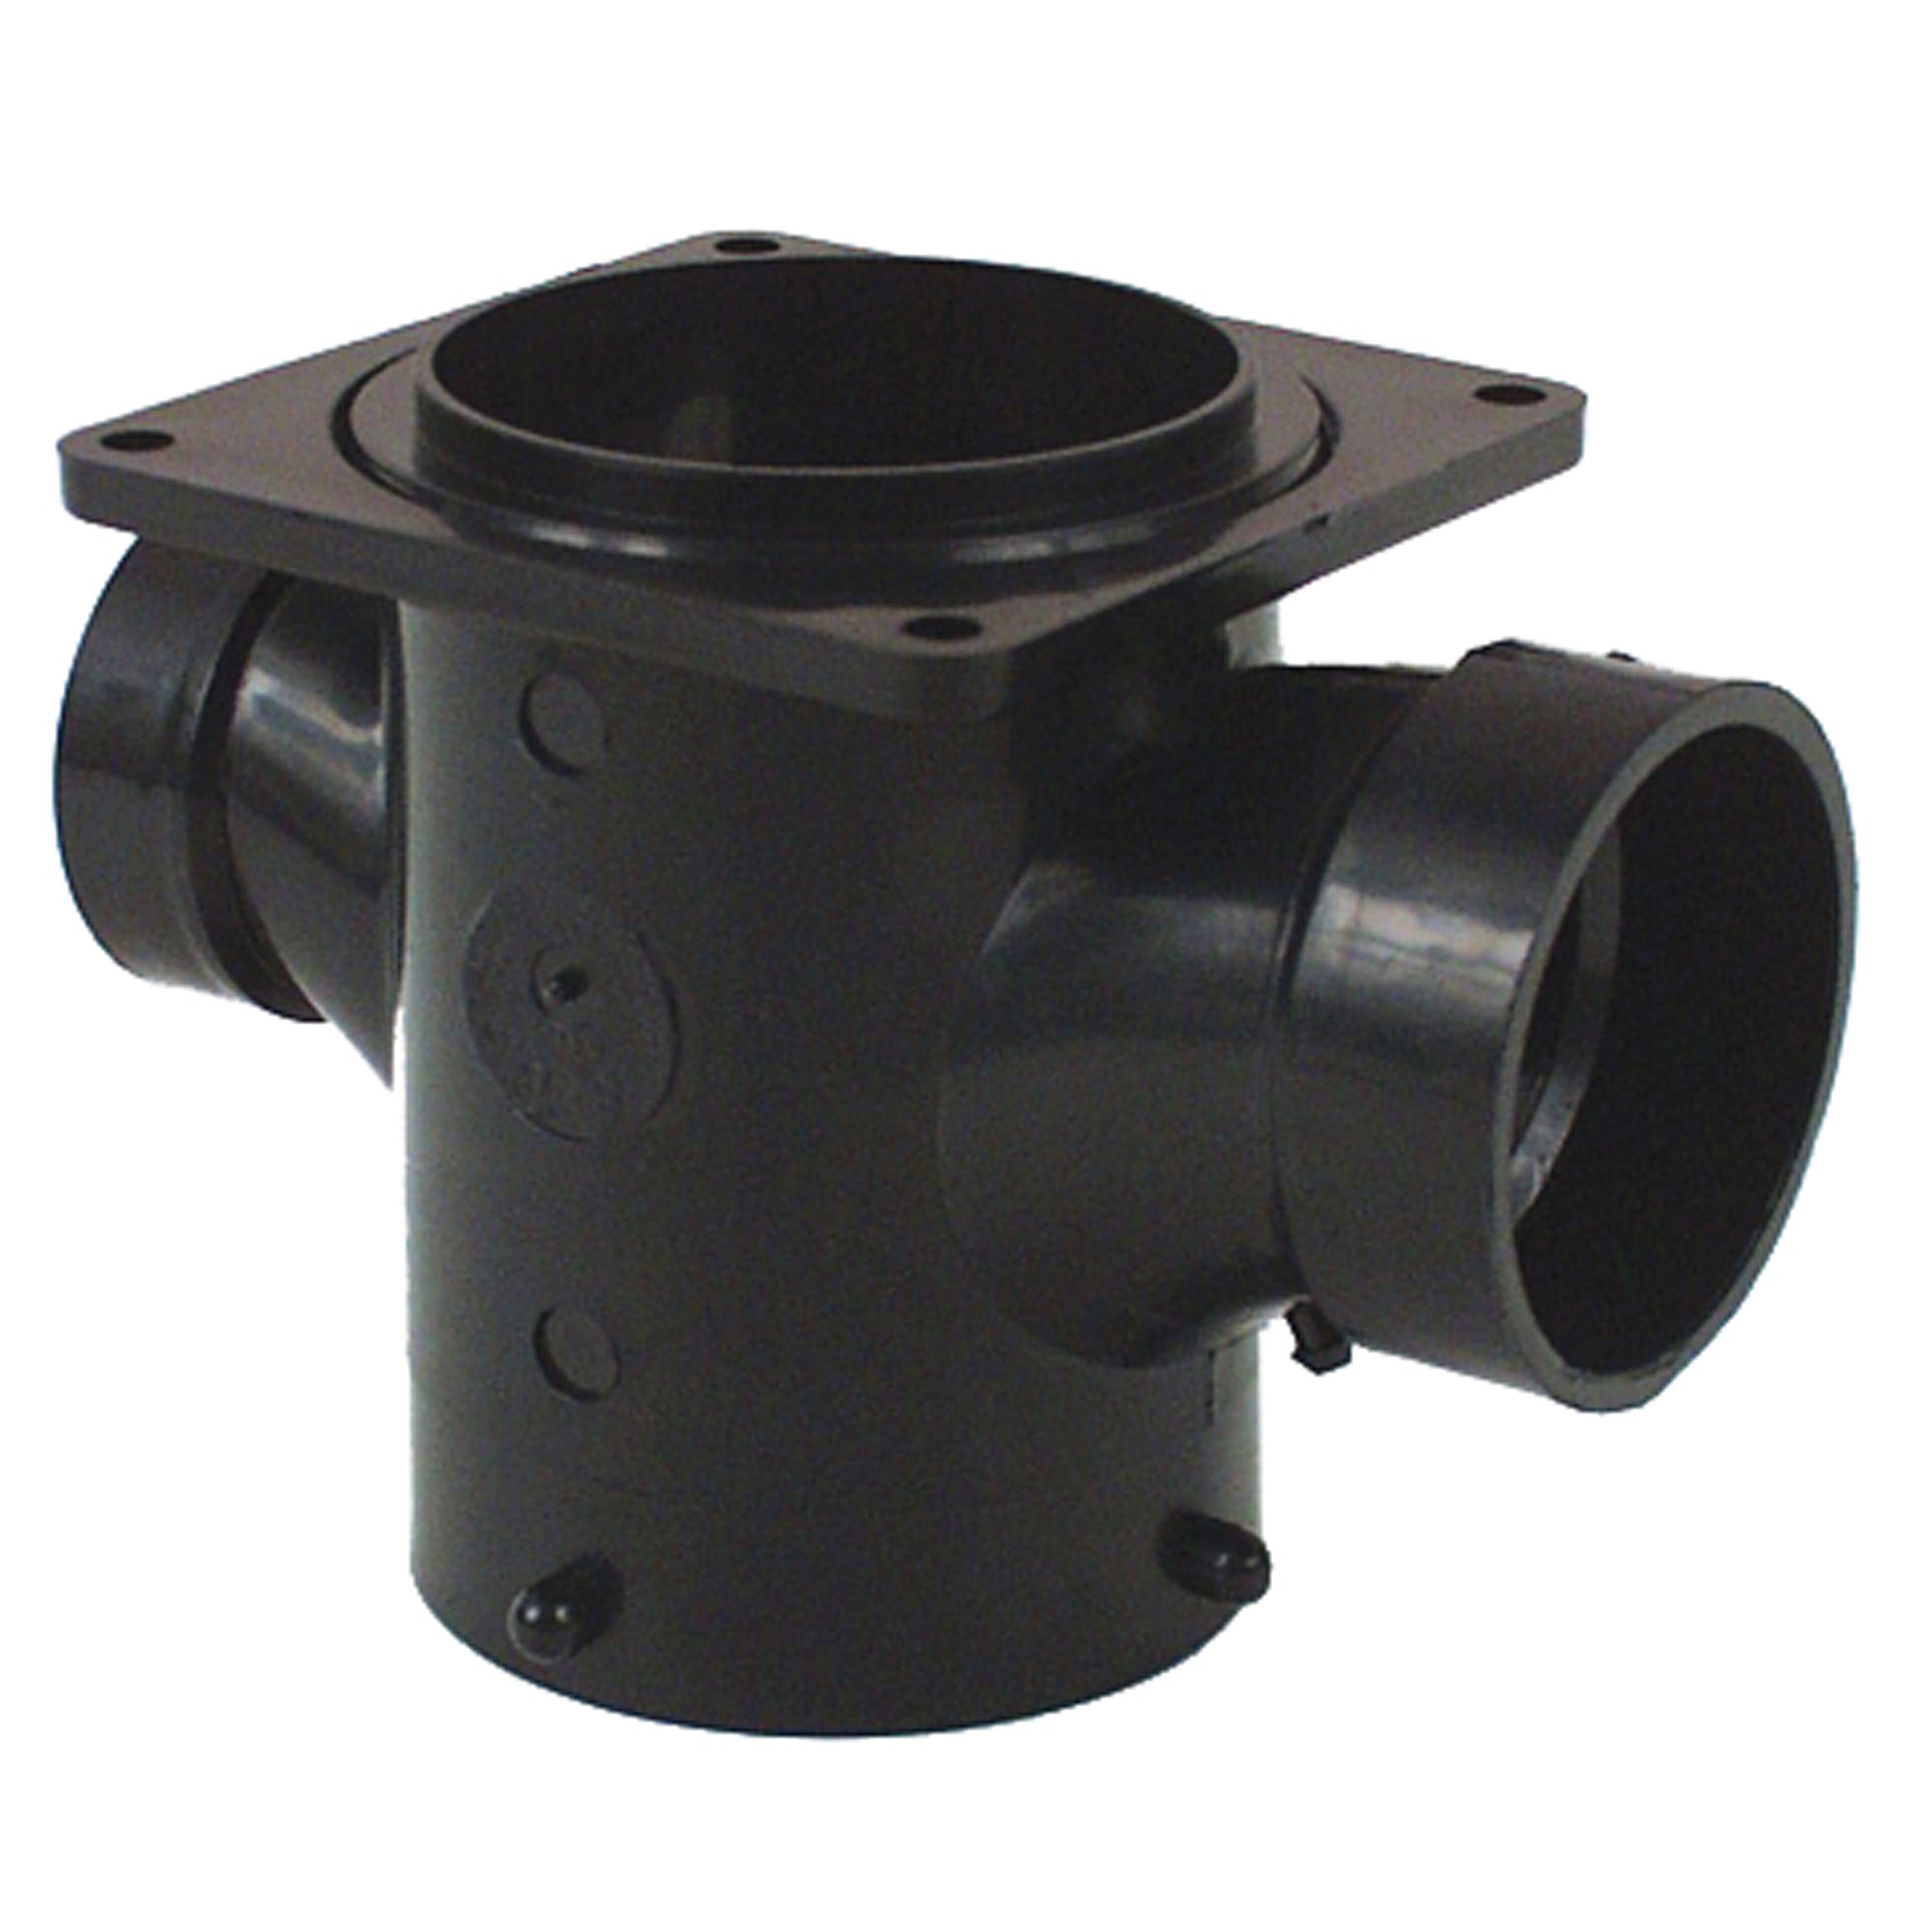 Valterra T1013 Flanged Valve Fitting - 3"Double Sanitary "T" Collector